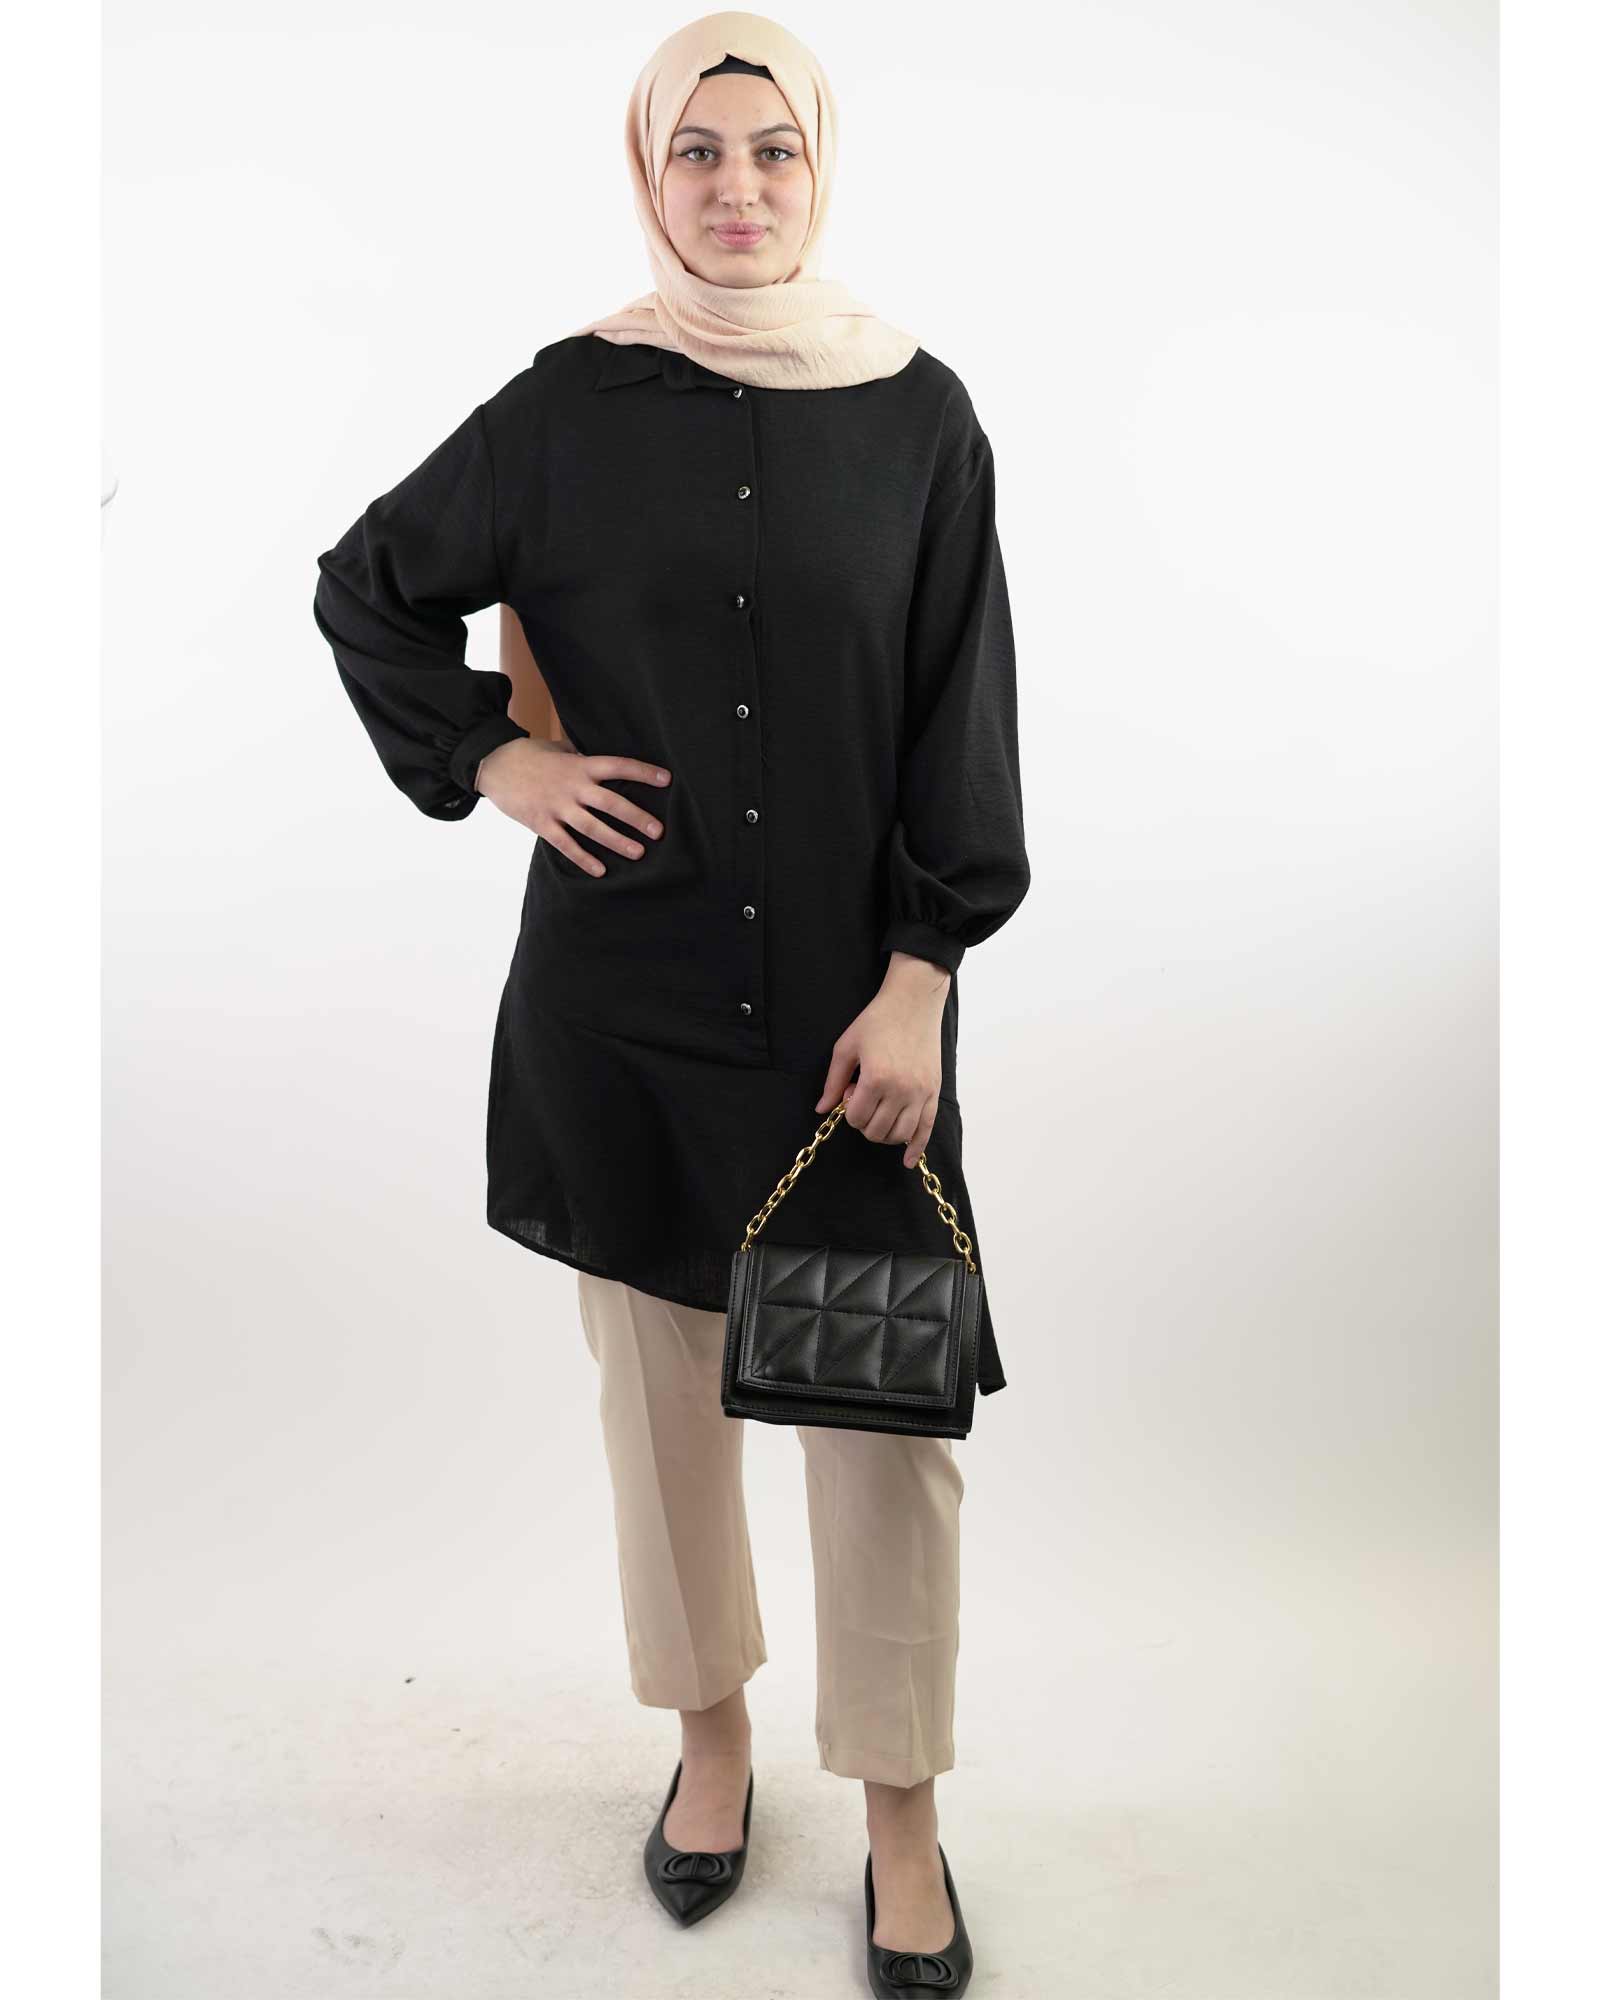 Tunic blouse with slit